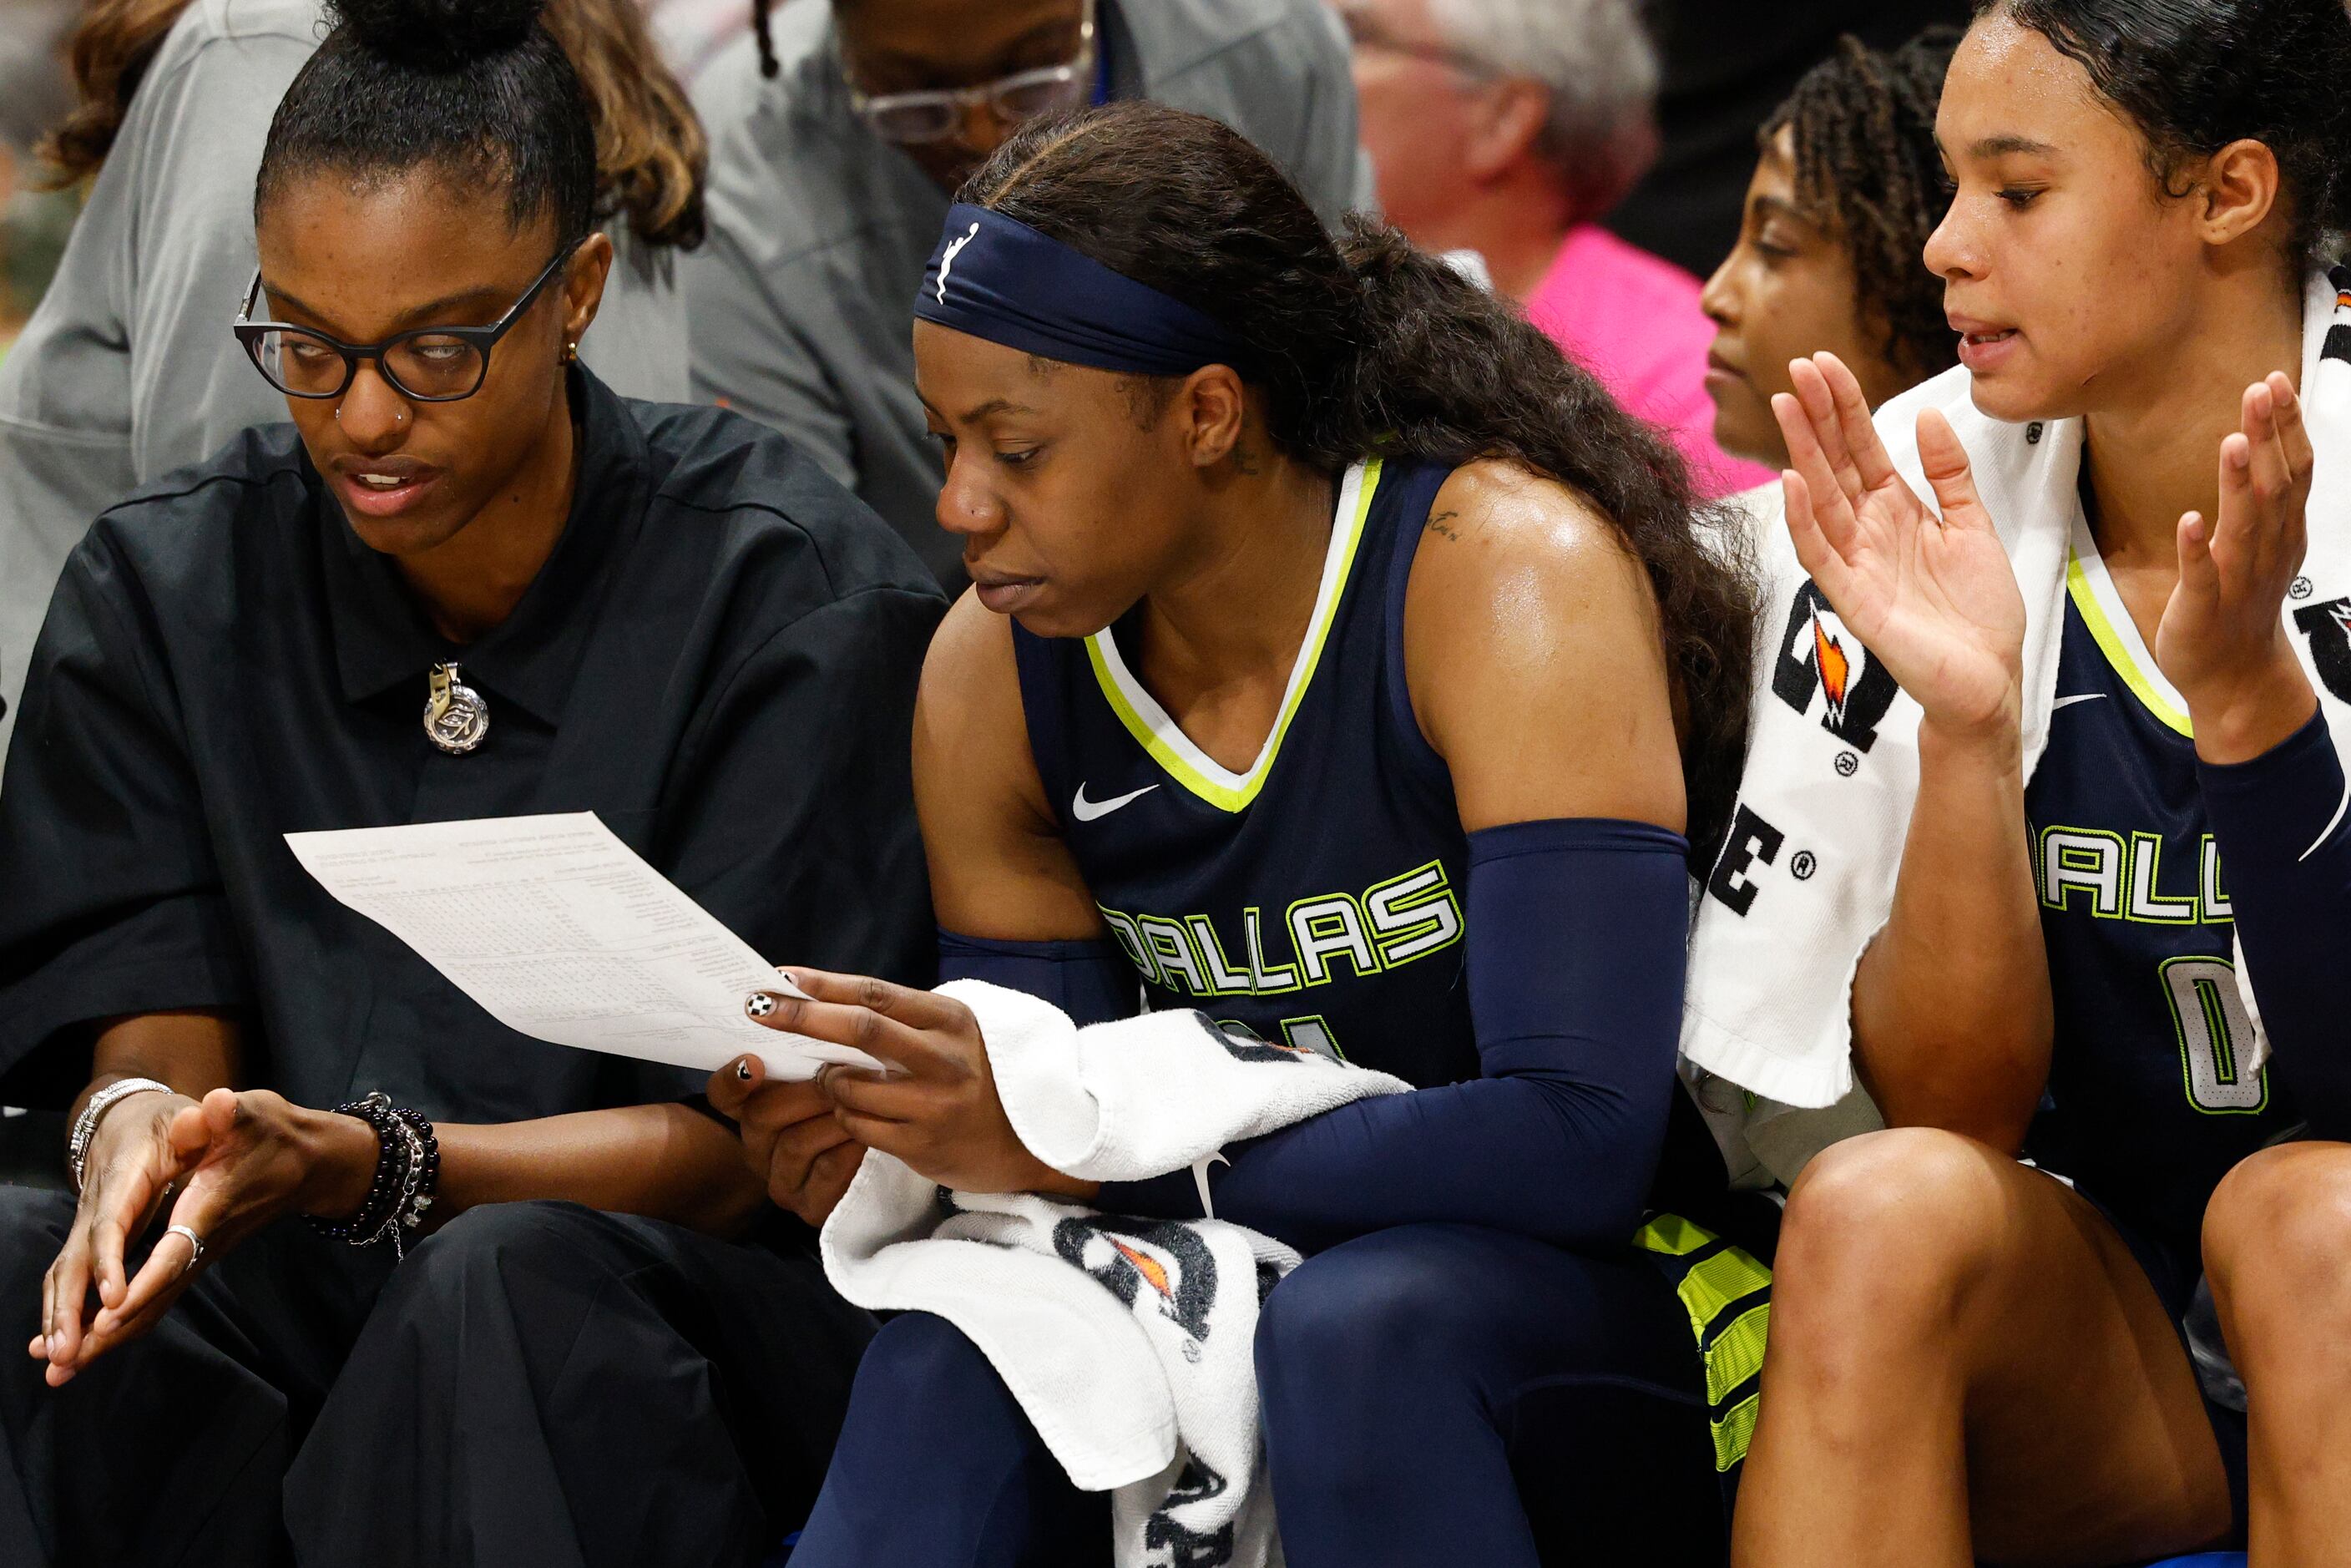 Dallas Wings guard Arike Ogunbowale (24) checks her stats after exiting the game during the...